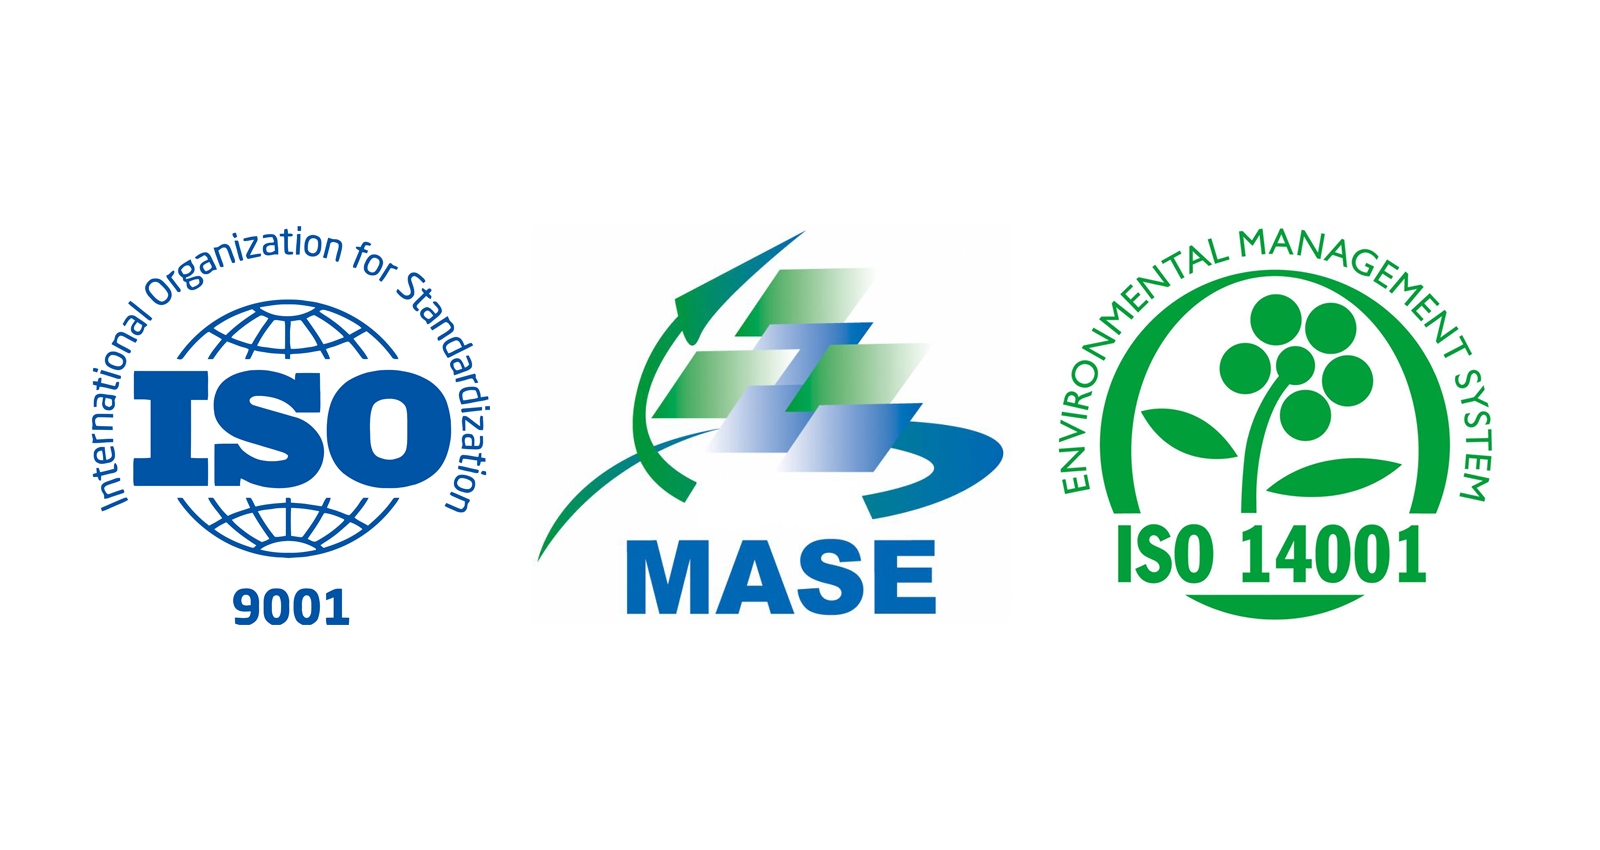 Formation Certification ISO 9001 Mase ISO 14001 ASM Consultant